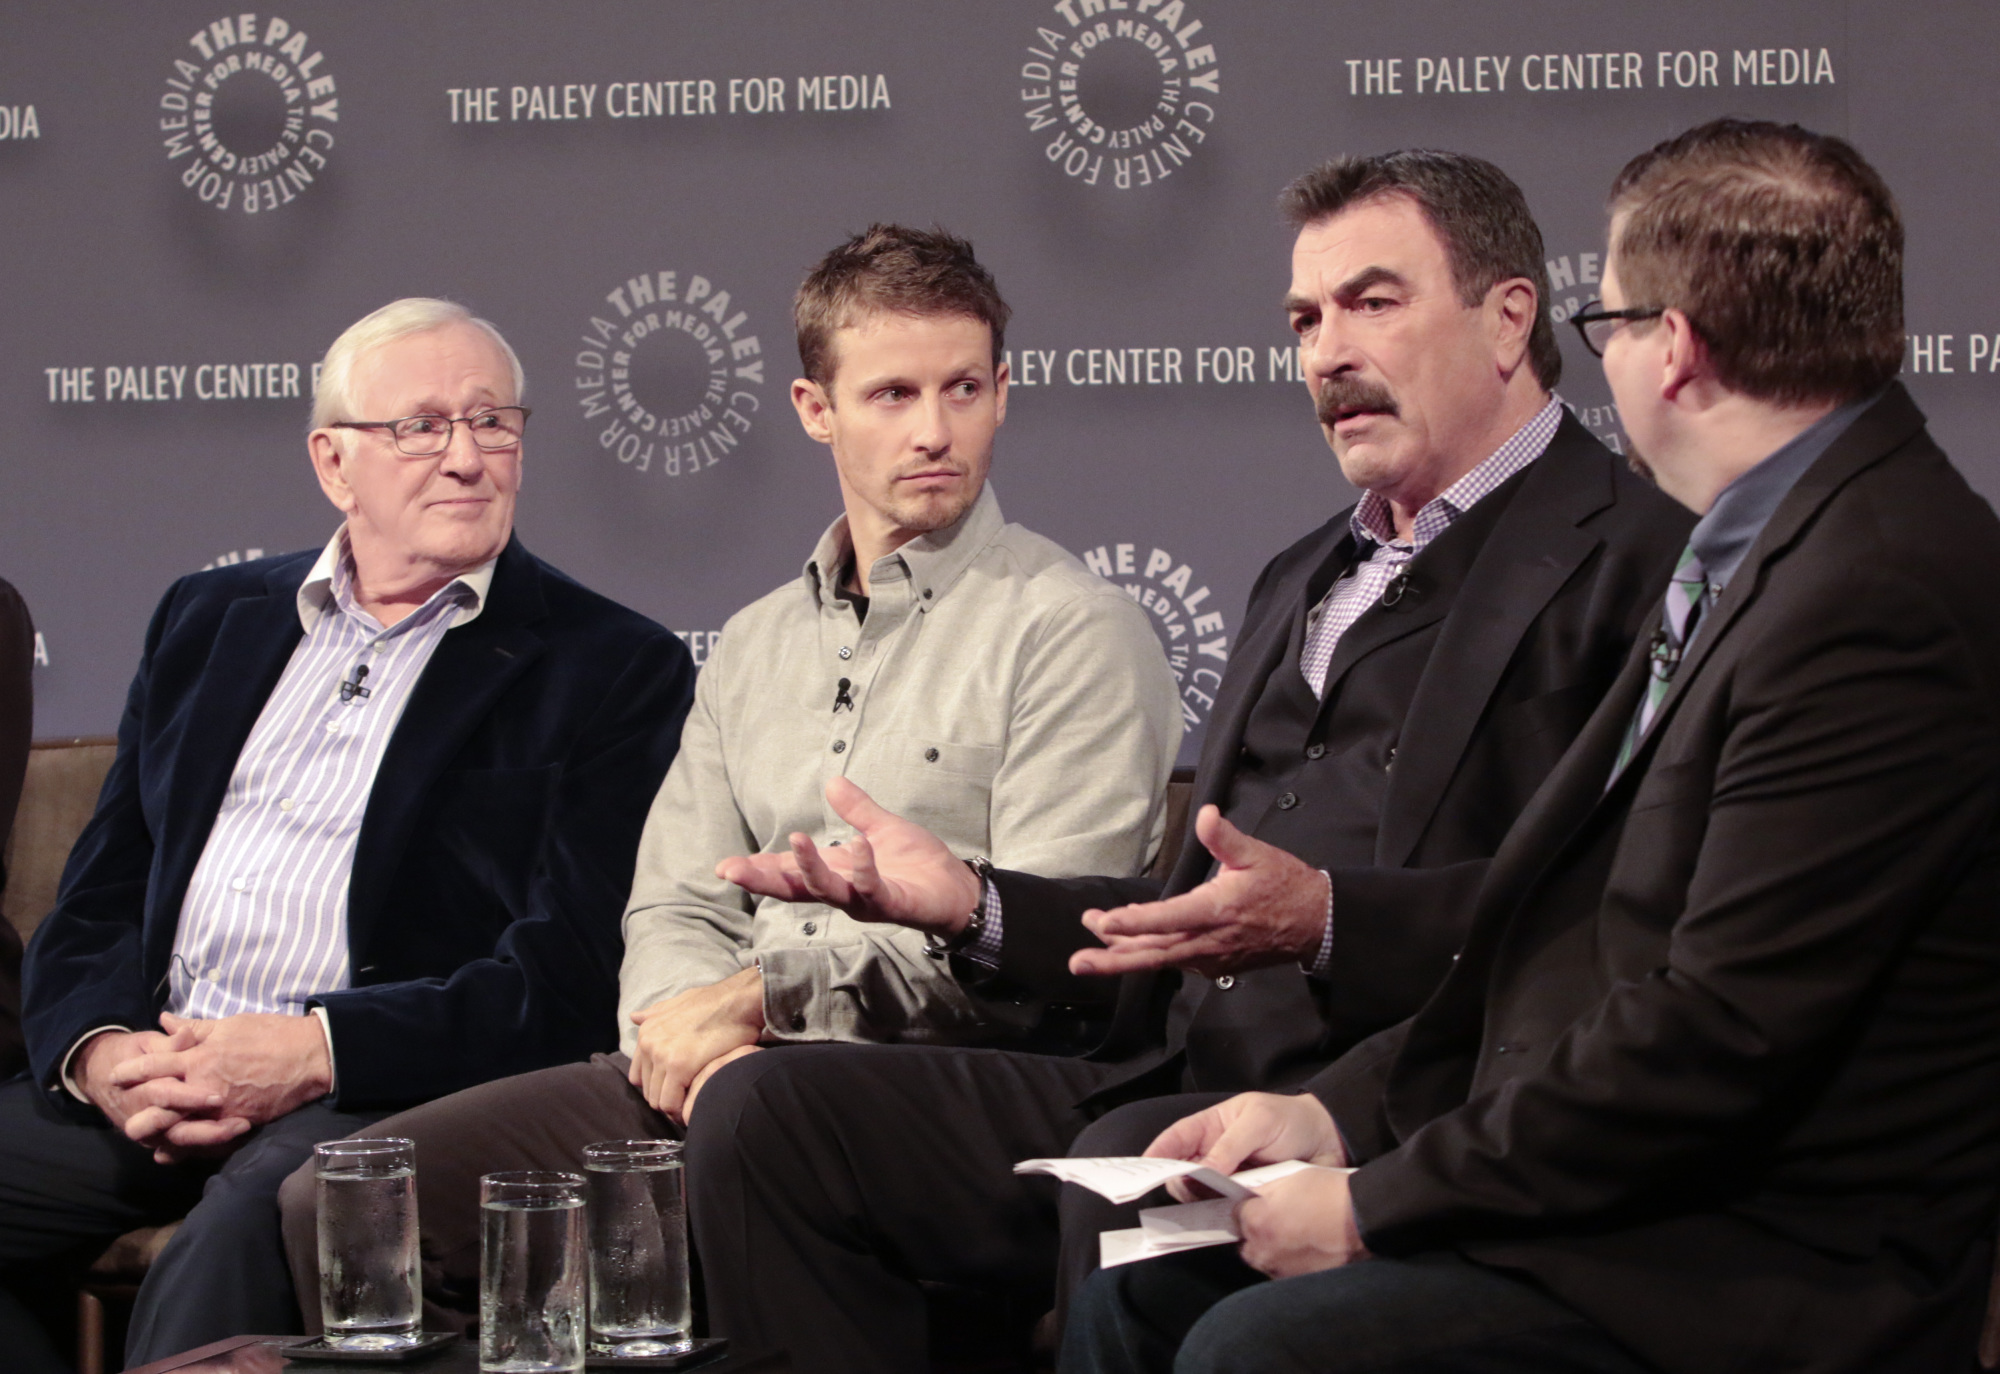 4. When Tom Selleck speaks, everyone is captivated.